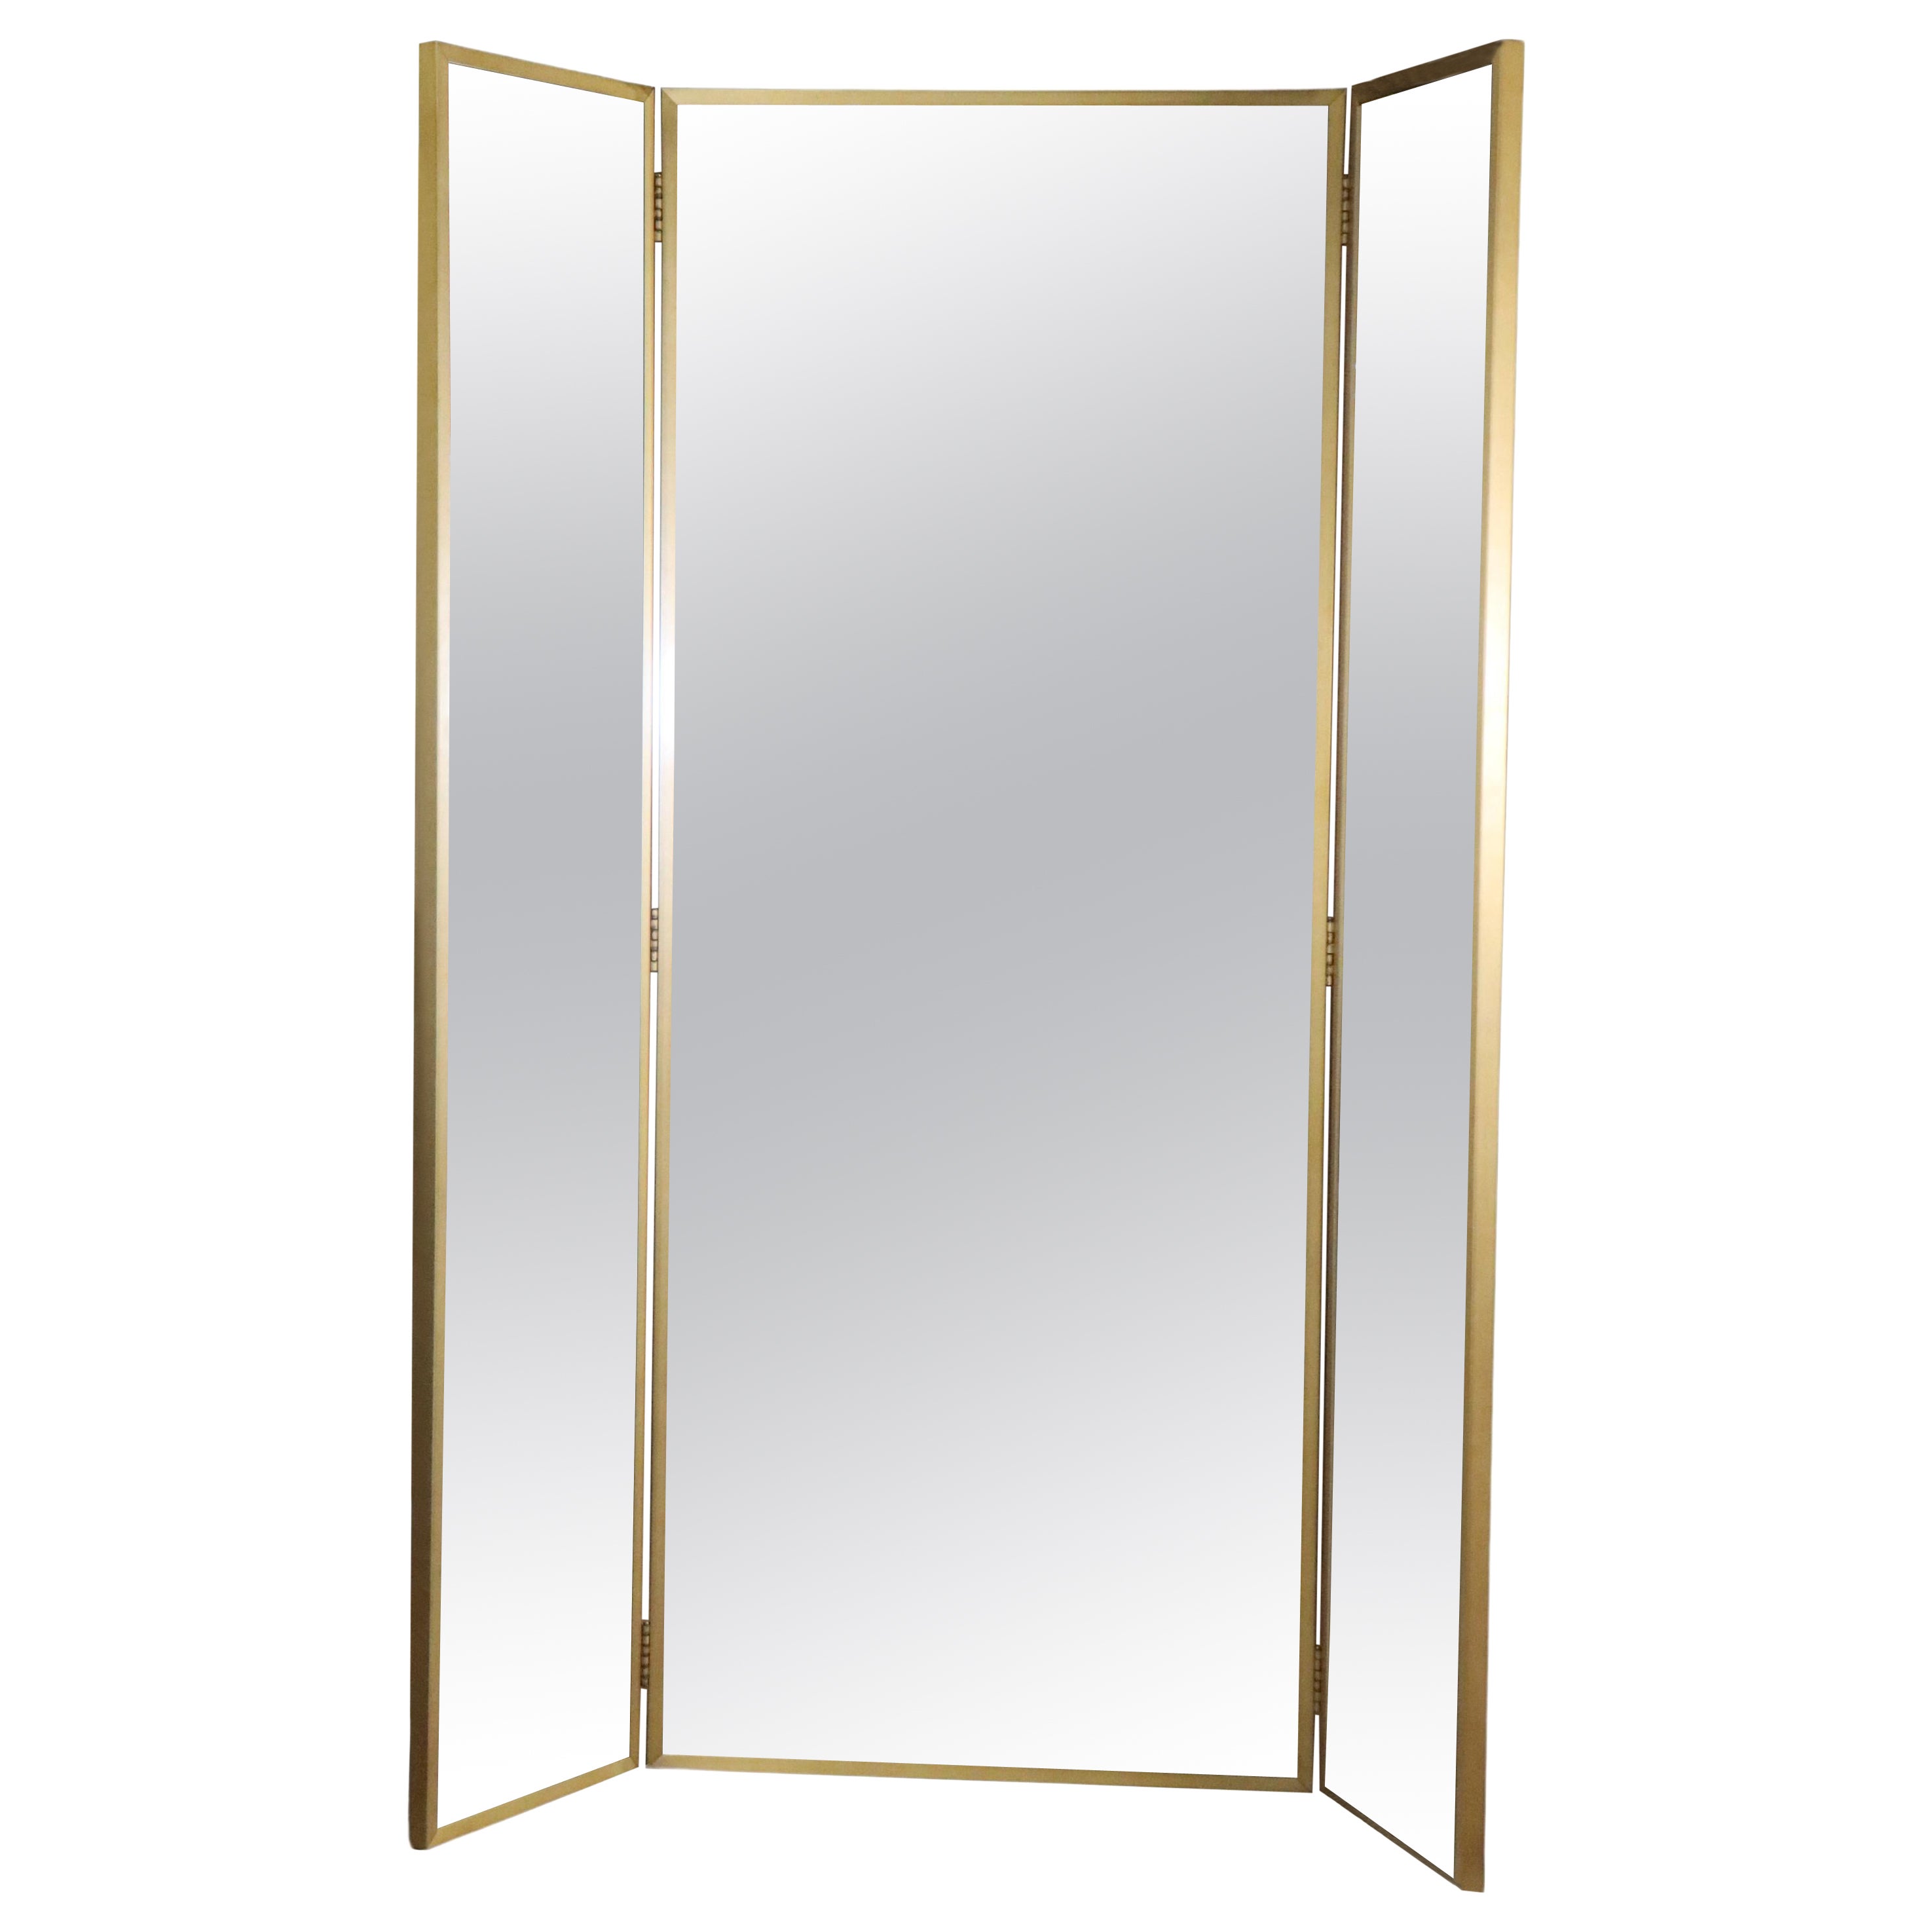 Six Foot Three Panel Mirror For Sale